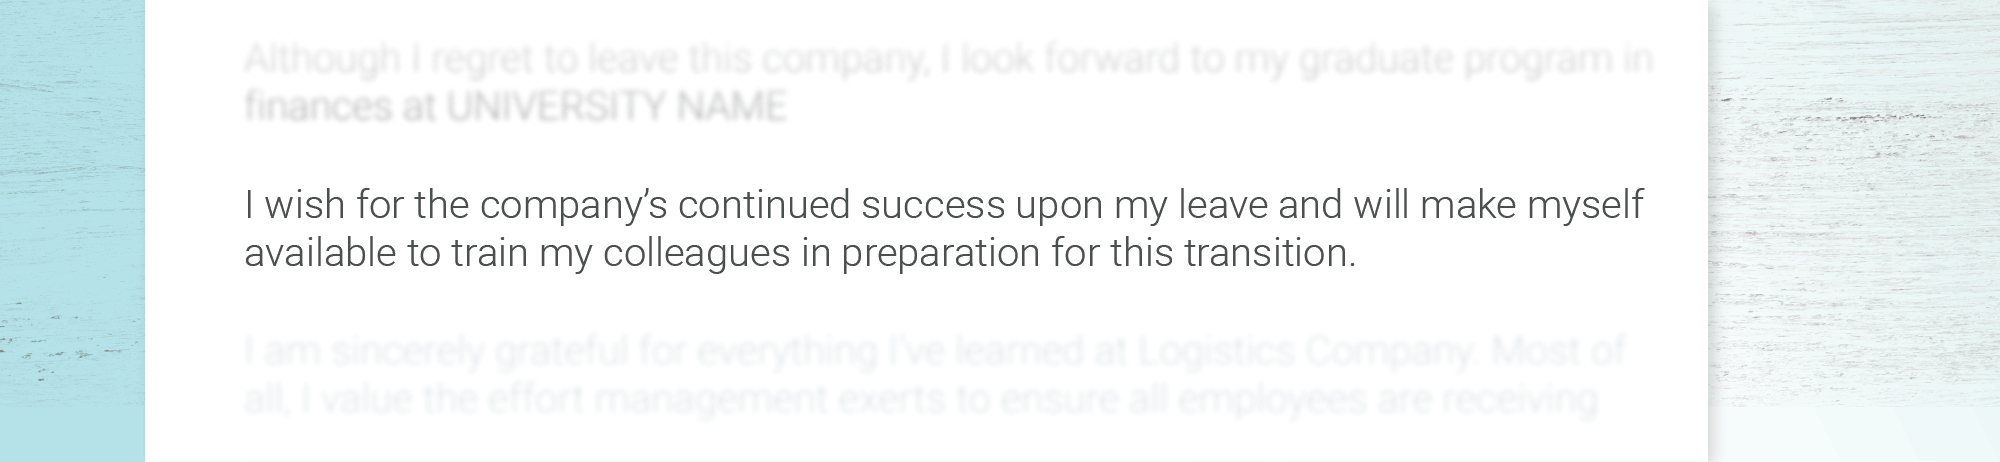 Quitting Letter To Boss from learn.g2.com